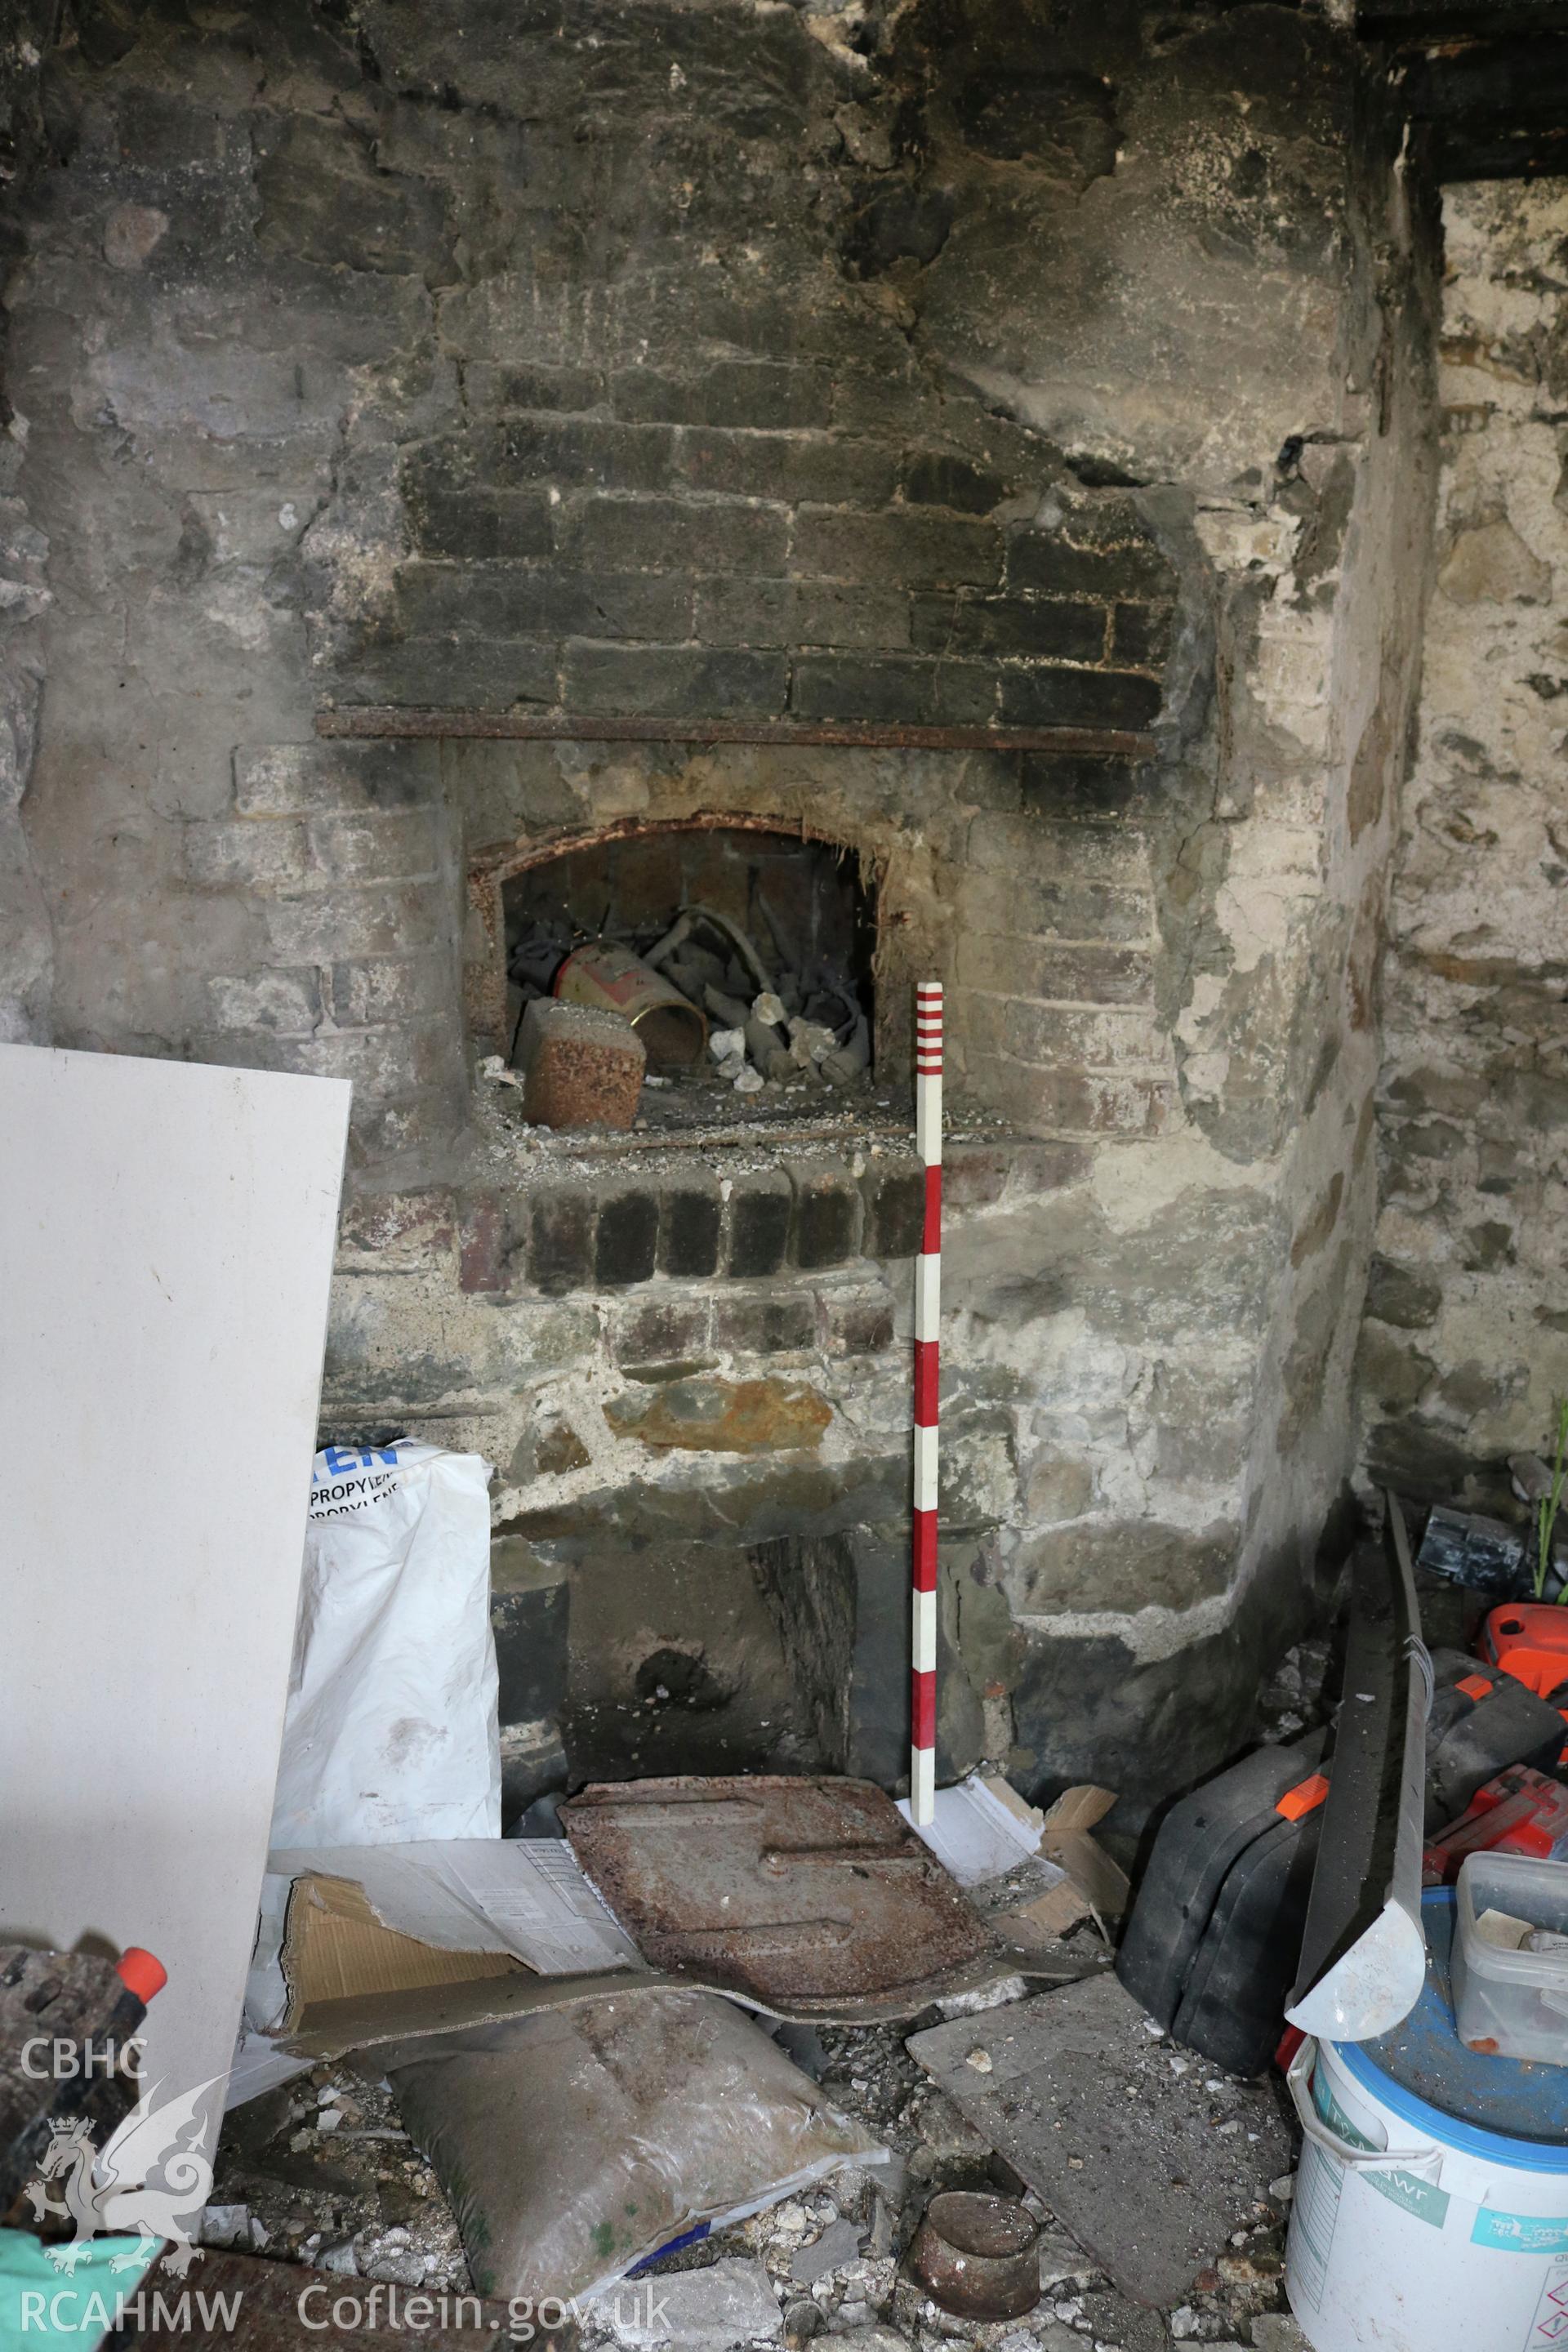 Photograph showing interior view of barn and cottage at Maes yr Hendre, taken by Dr Marian Gwyn, 6th July 2016. (Original Reference no. 0071)